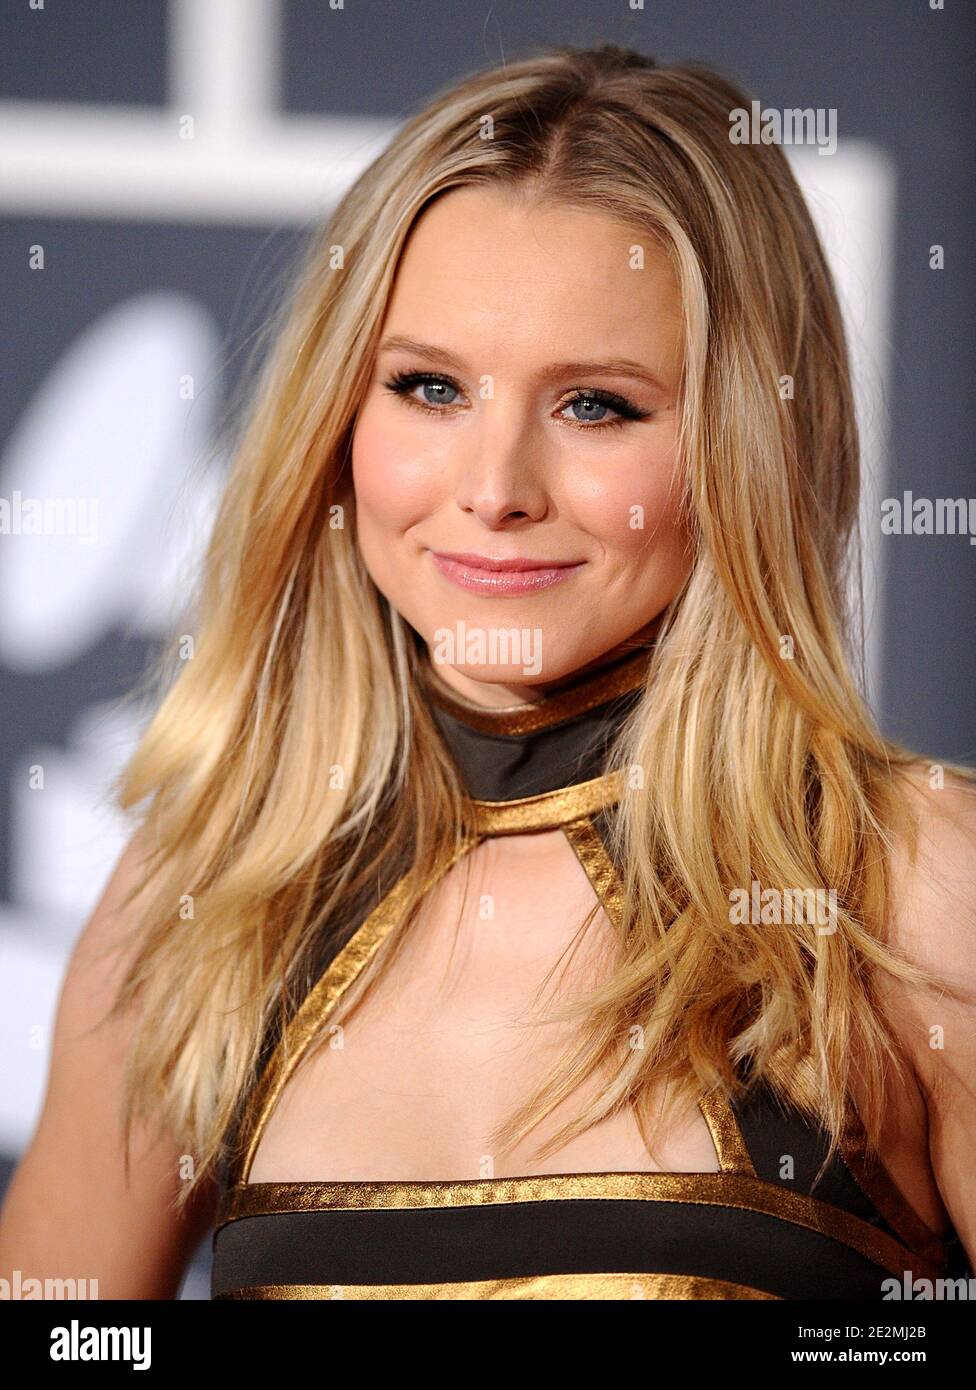 Kristen Bell At Arrivals For 52Nd Annual Grammy Awards, 56% OFF